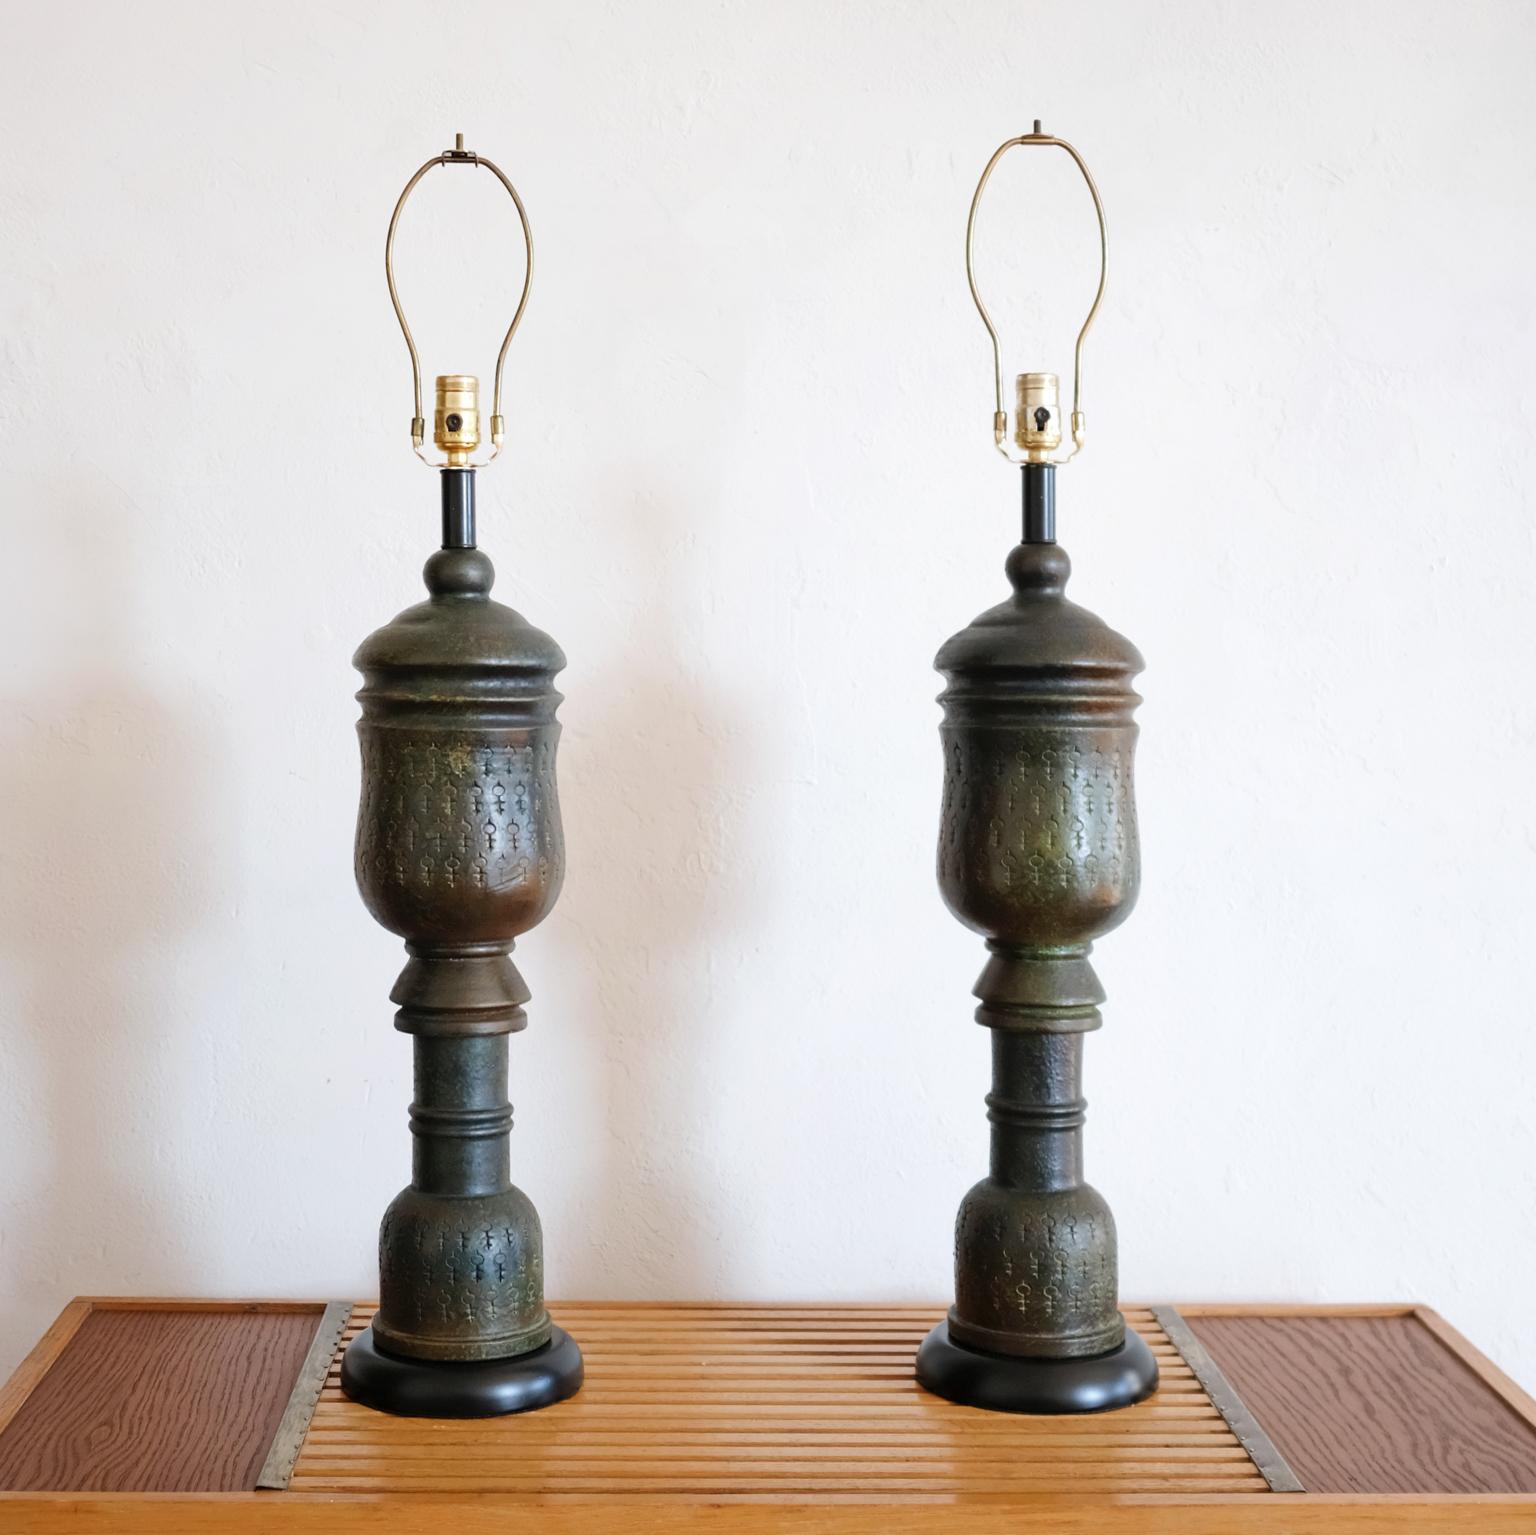 A pair of ceramic lamps by Bitossi. The glaze has an incredible rich patina look. There is an incised symbols repeated around the circumference of two sections. Wood bases. Shades are not included. Made in Italy, 1960.